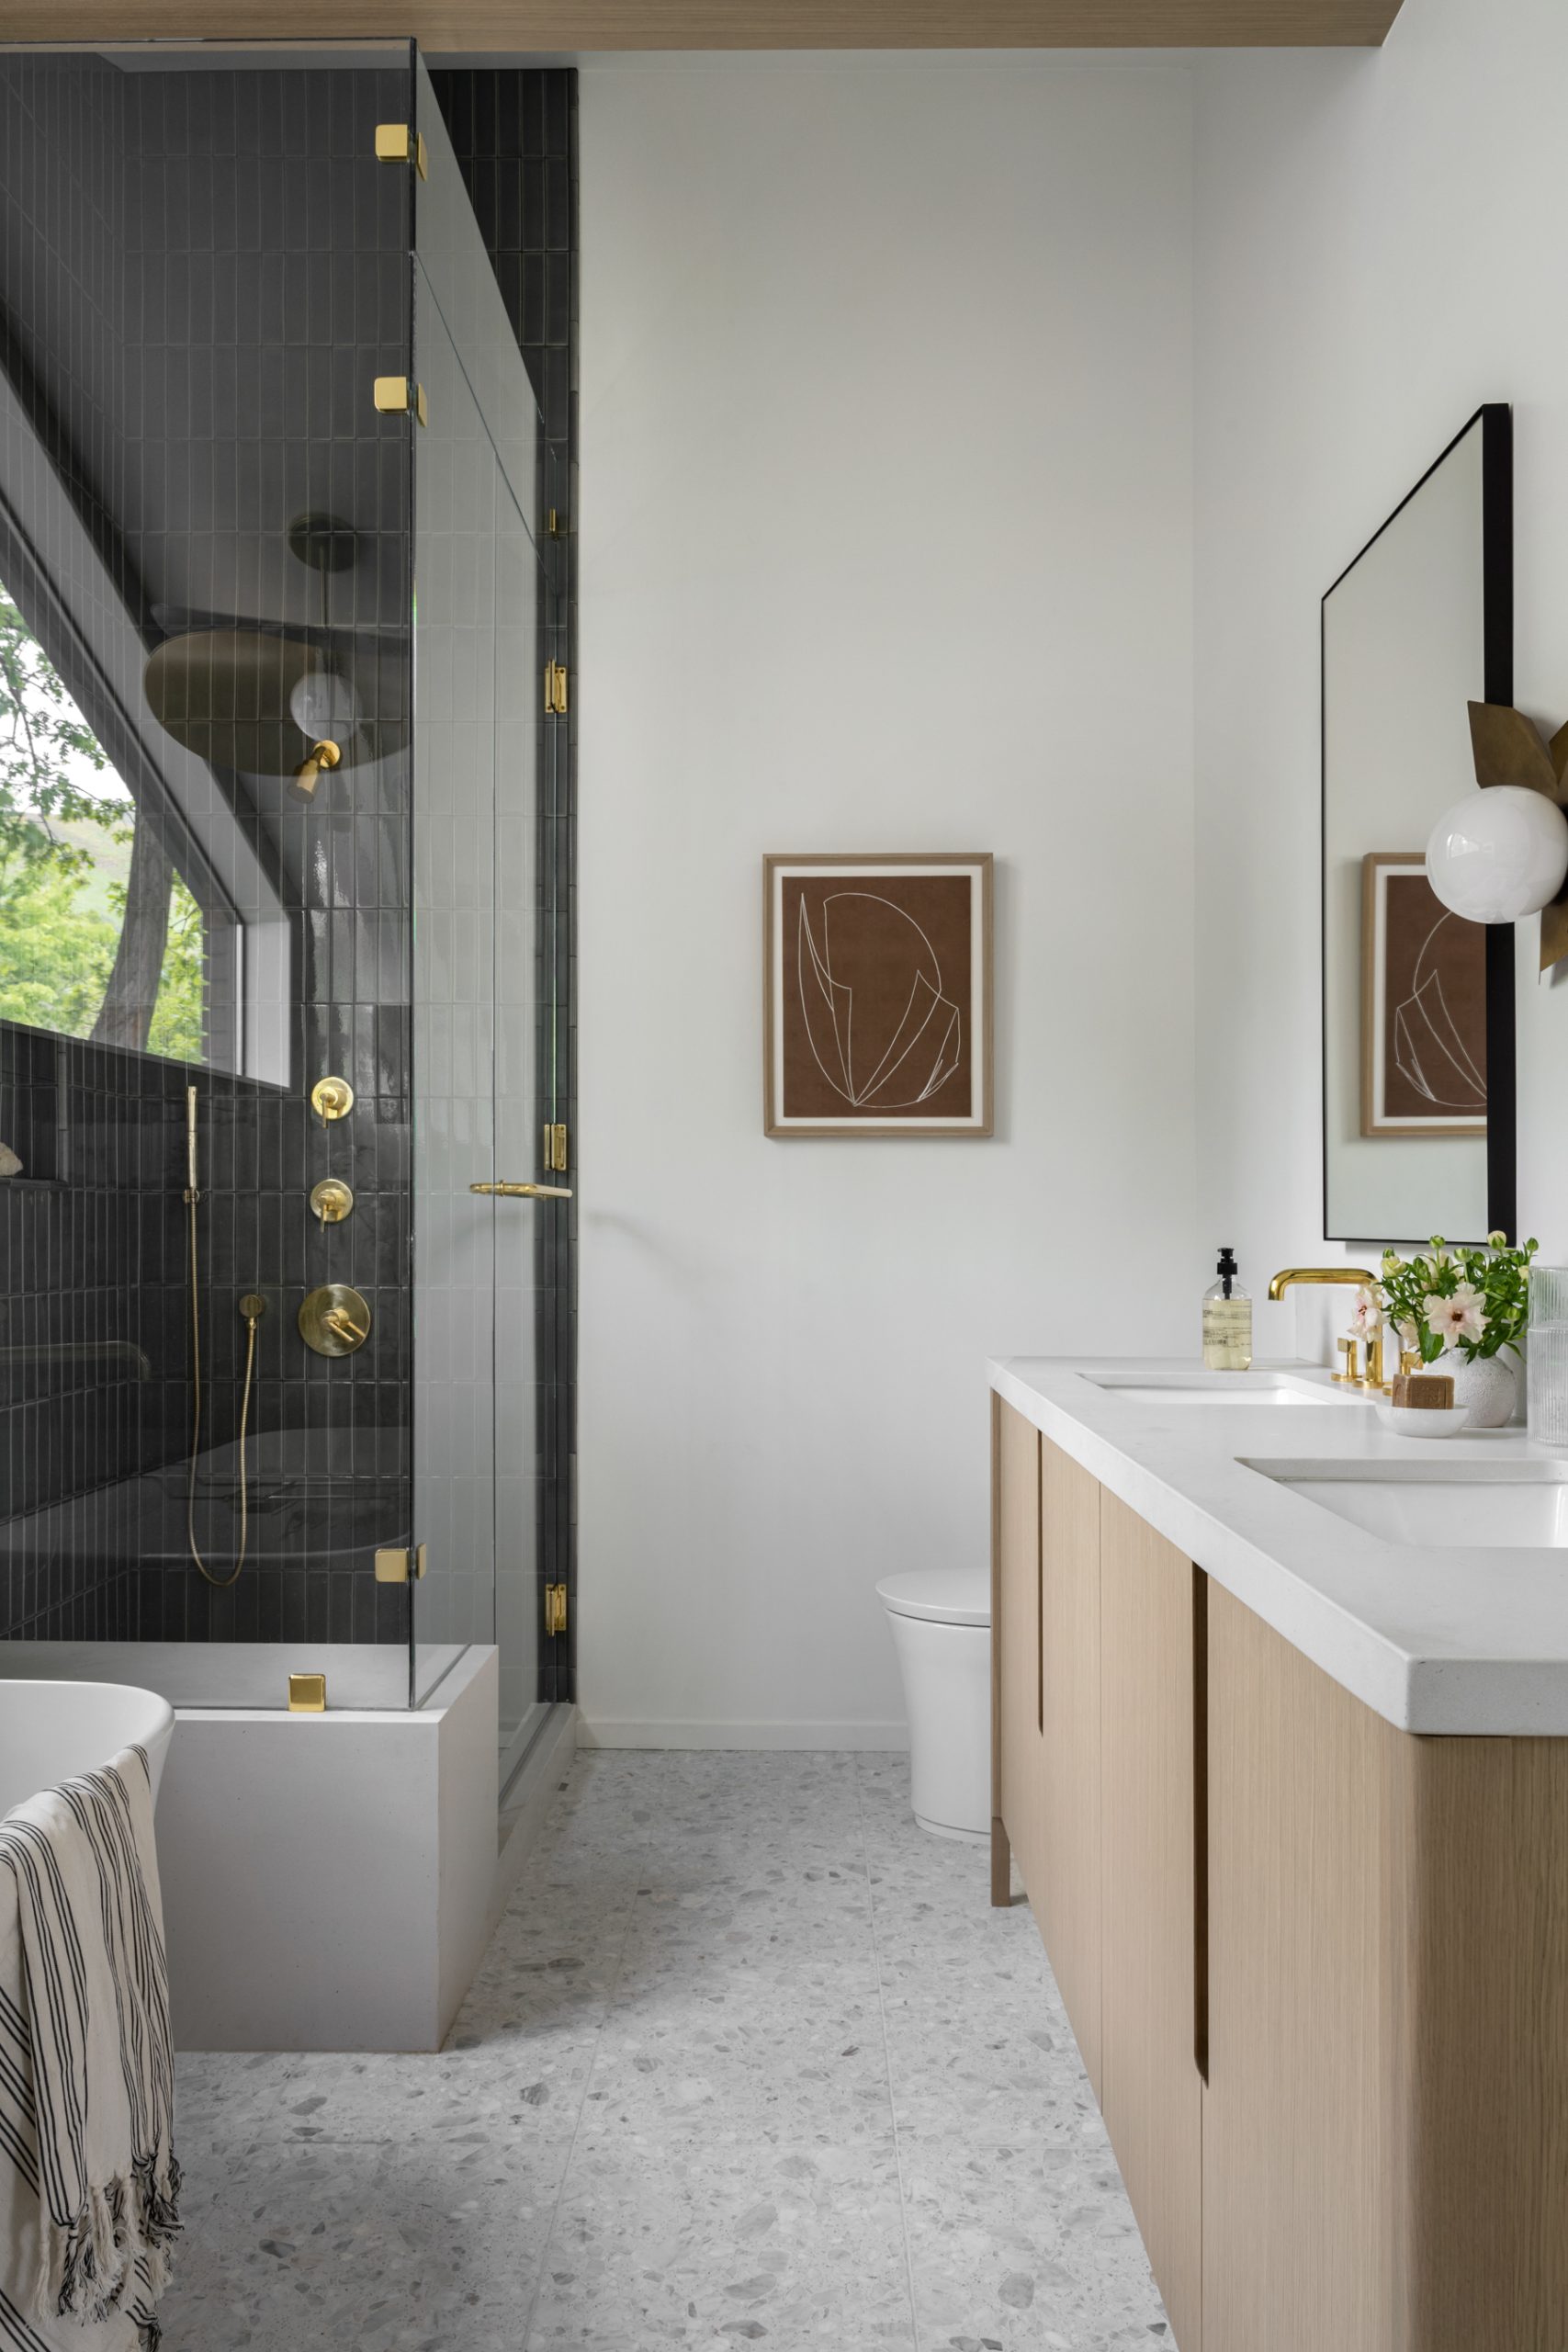 midcentury bathroom with green tile in shower and wood cabinets